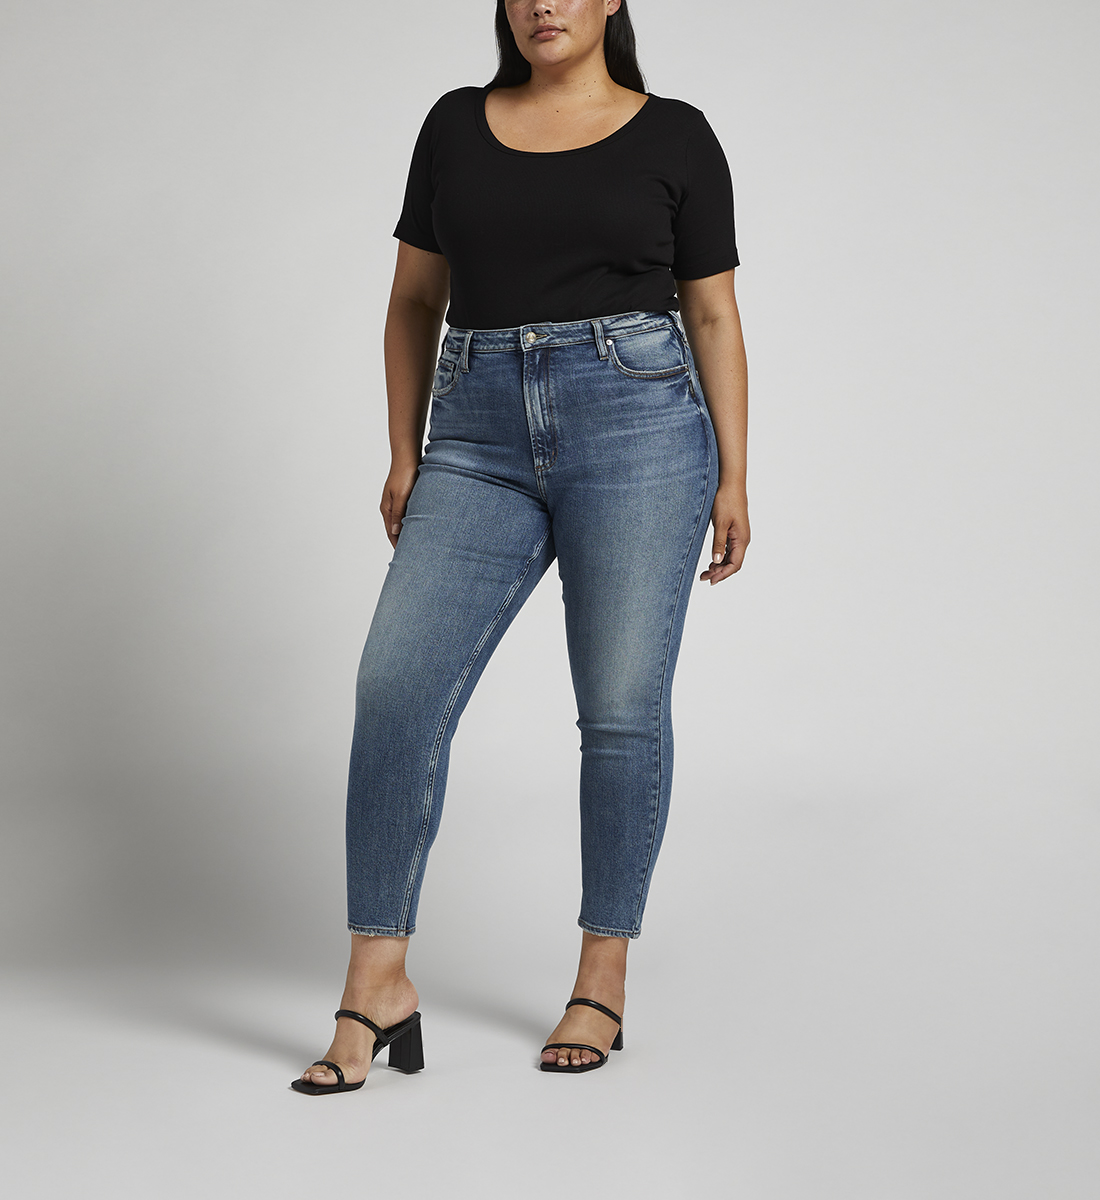 Silver Jeans High Rise Tapered Leg Mom Jean Plus Size